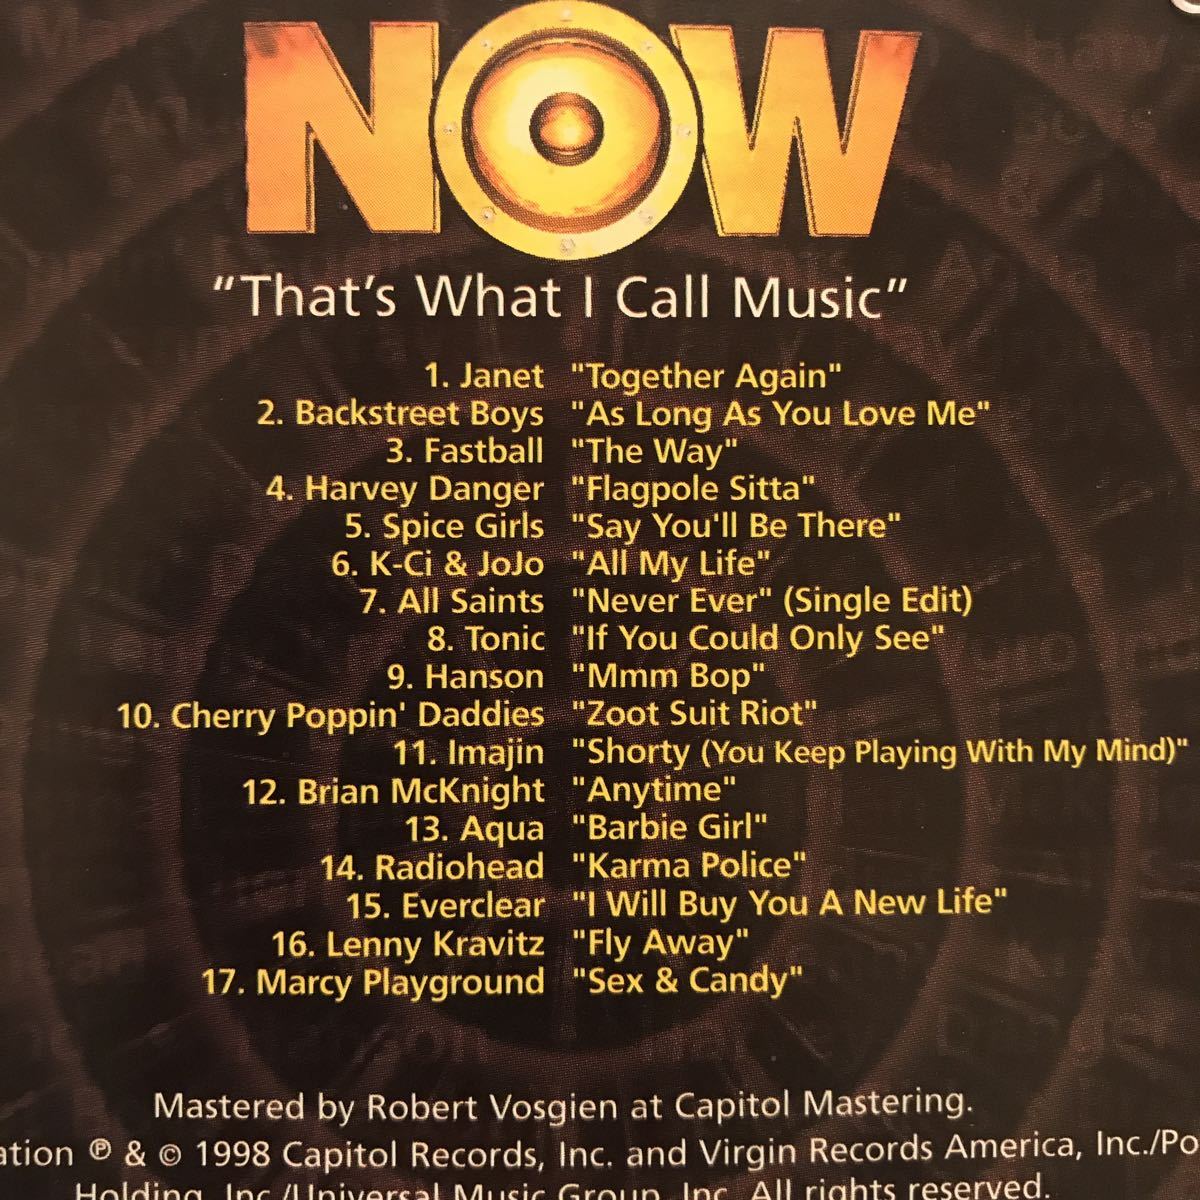 CD NOW That's What I Call Music! Vol. 1 by Various Artists 1998 90年代 ヒット集 洋楽 オムニバス _(R1)_画像4